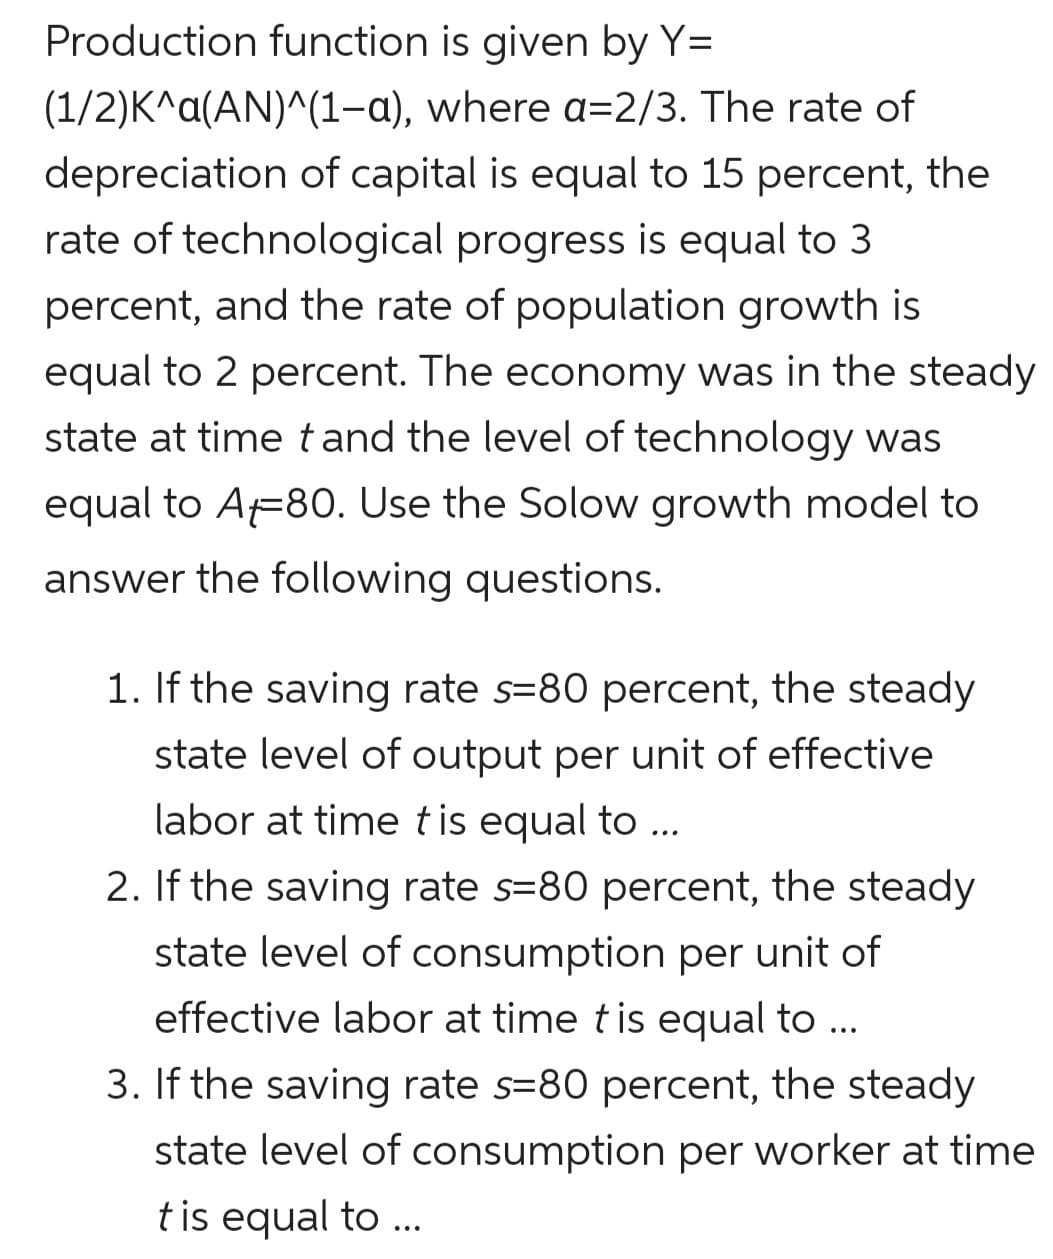 Production function is given by Y=
(1/2)K^a(AN)^(1-a), where a=2/3. The rate of
depreciation of capital is equal to 15 percent, the
rate of technological progress is equal to 3
percent, and the rate of population growth is
equal to 2 percent. The economy was in the steady
state at time tand the level of technology was
equal to A=80. Use the Solow growth model to
answer the following questions.
1. If the saving rate s=80 percent, the steady
state level of output per unit of effective
labor at time tis equal to ...
2. If the saving rate s=80 percent, the steady
state level of consumption per unit of
effective labor at time tis equal to ...
3. If the saving rate s=80 percent, the steady
state level of consumption per worker at time
tis equal to ..
